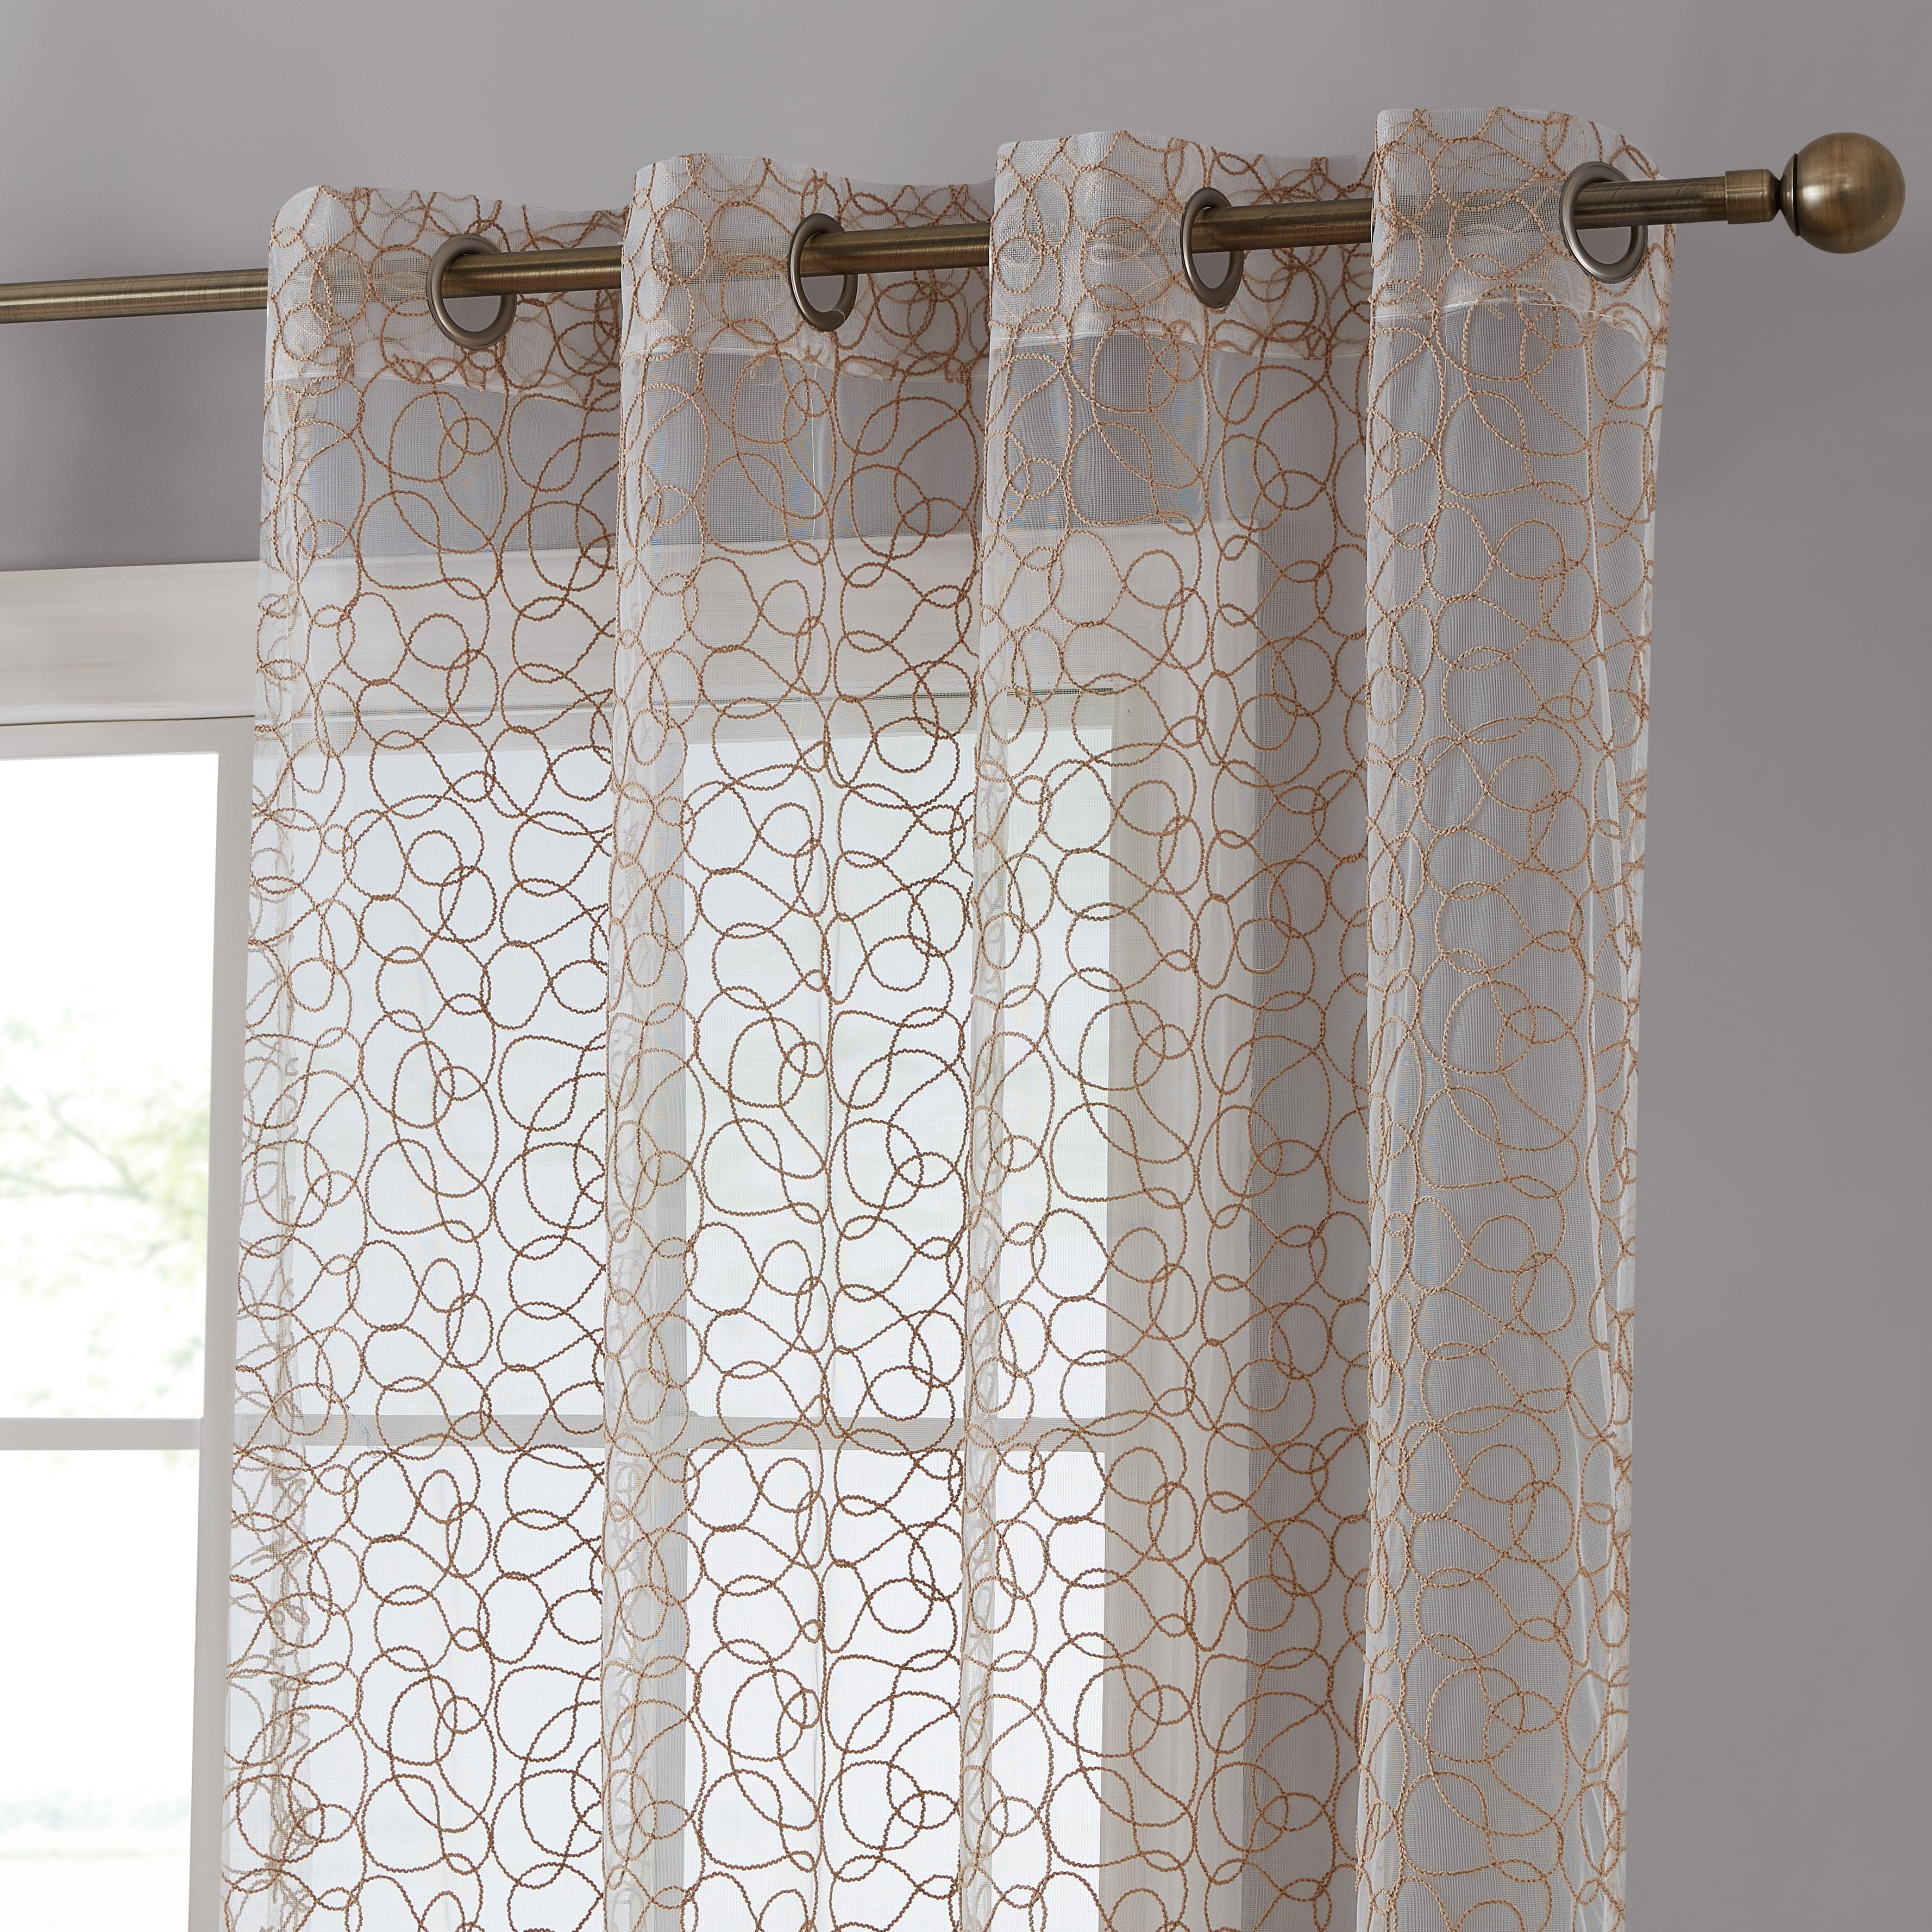 Small Windows and Bathroom HLC.ME Audrey Embroidered Sheer Voile Window Curtain Short Rod Pocket Tiers for Kitchen Bedroom 30 x 24 inch Long, Dusty Blue